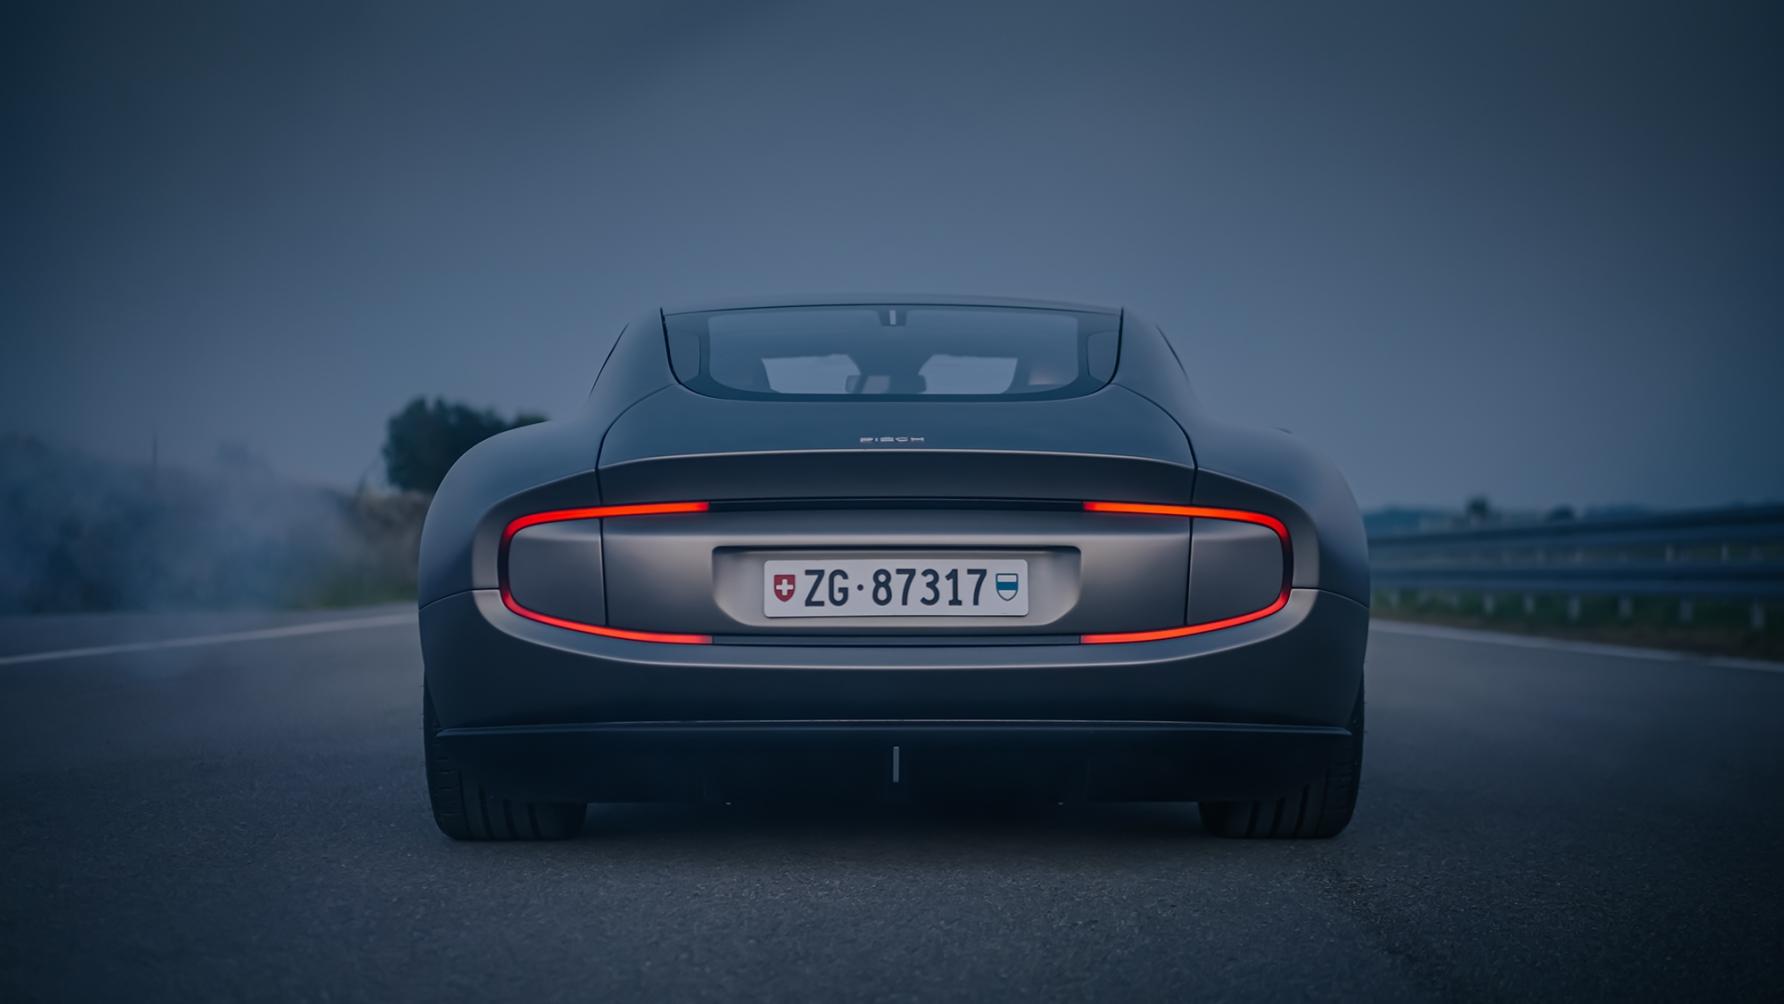 Back view of the 2021 Piech GT